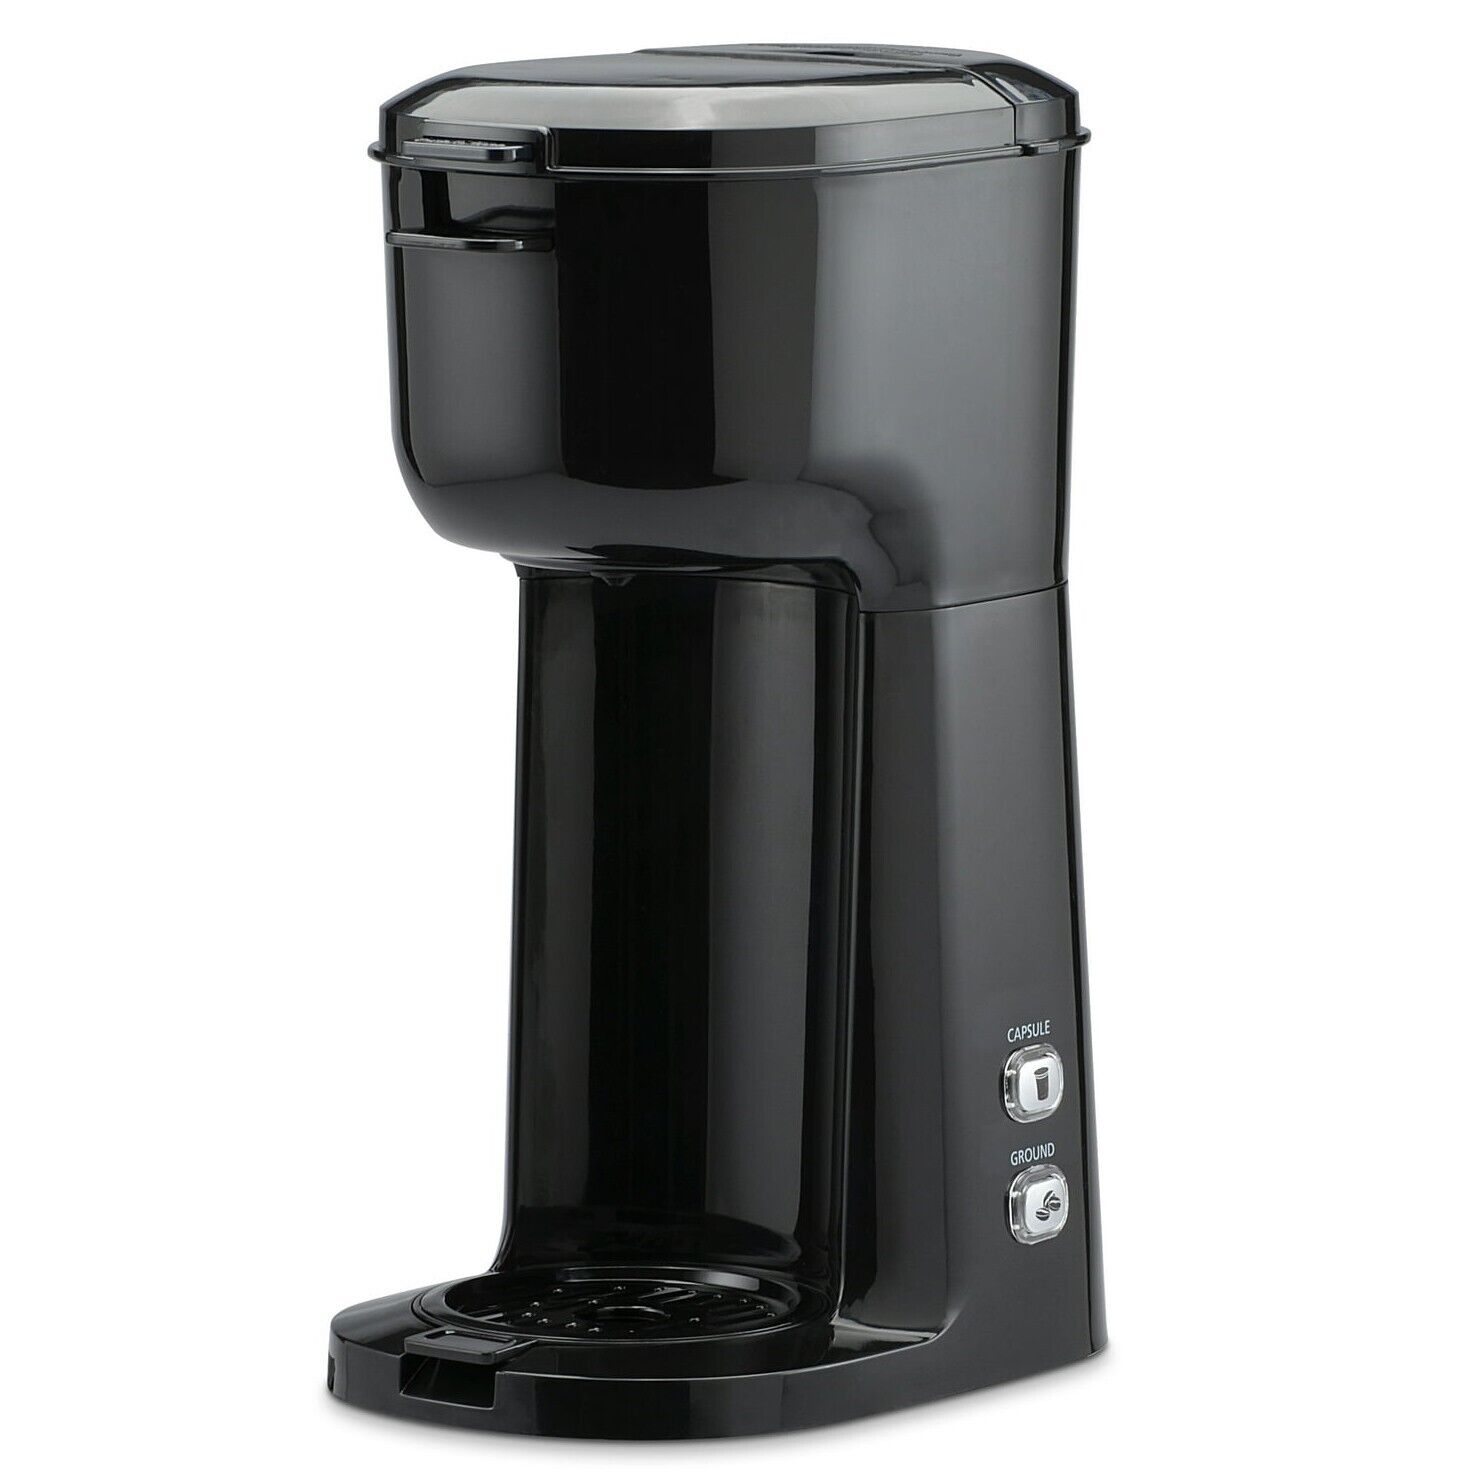 Versatile Coffee Maker for K-cups and Ground Coffee